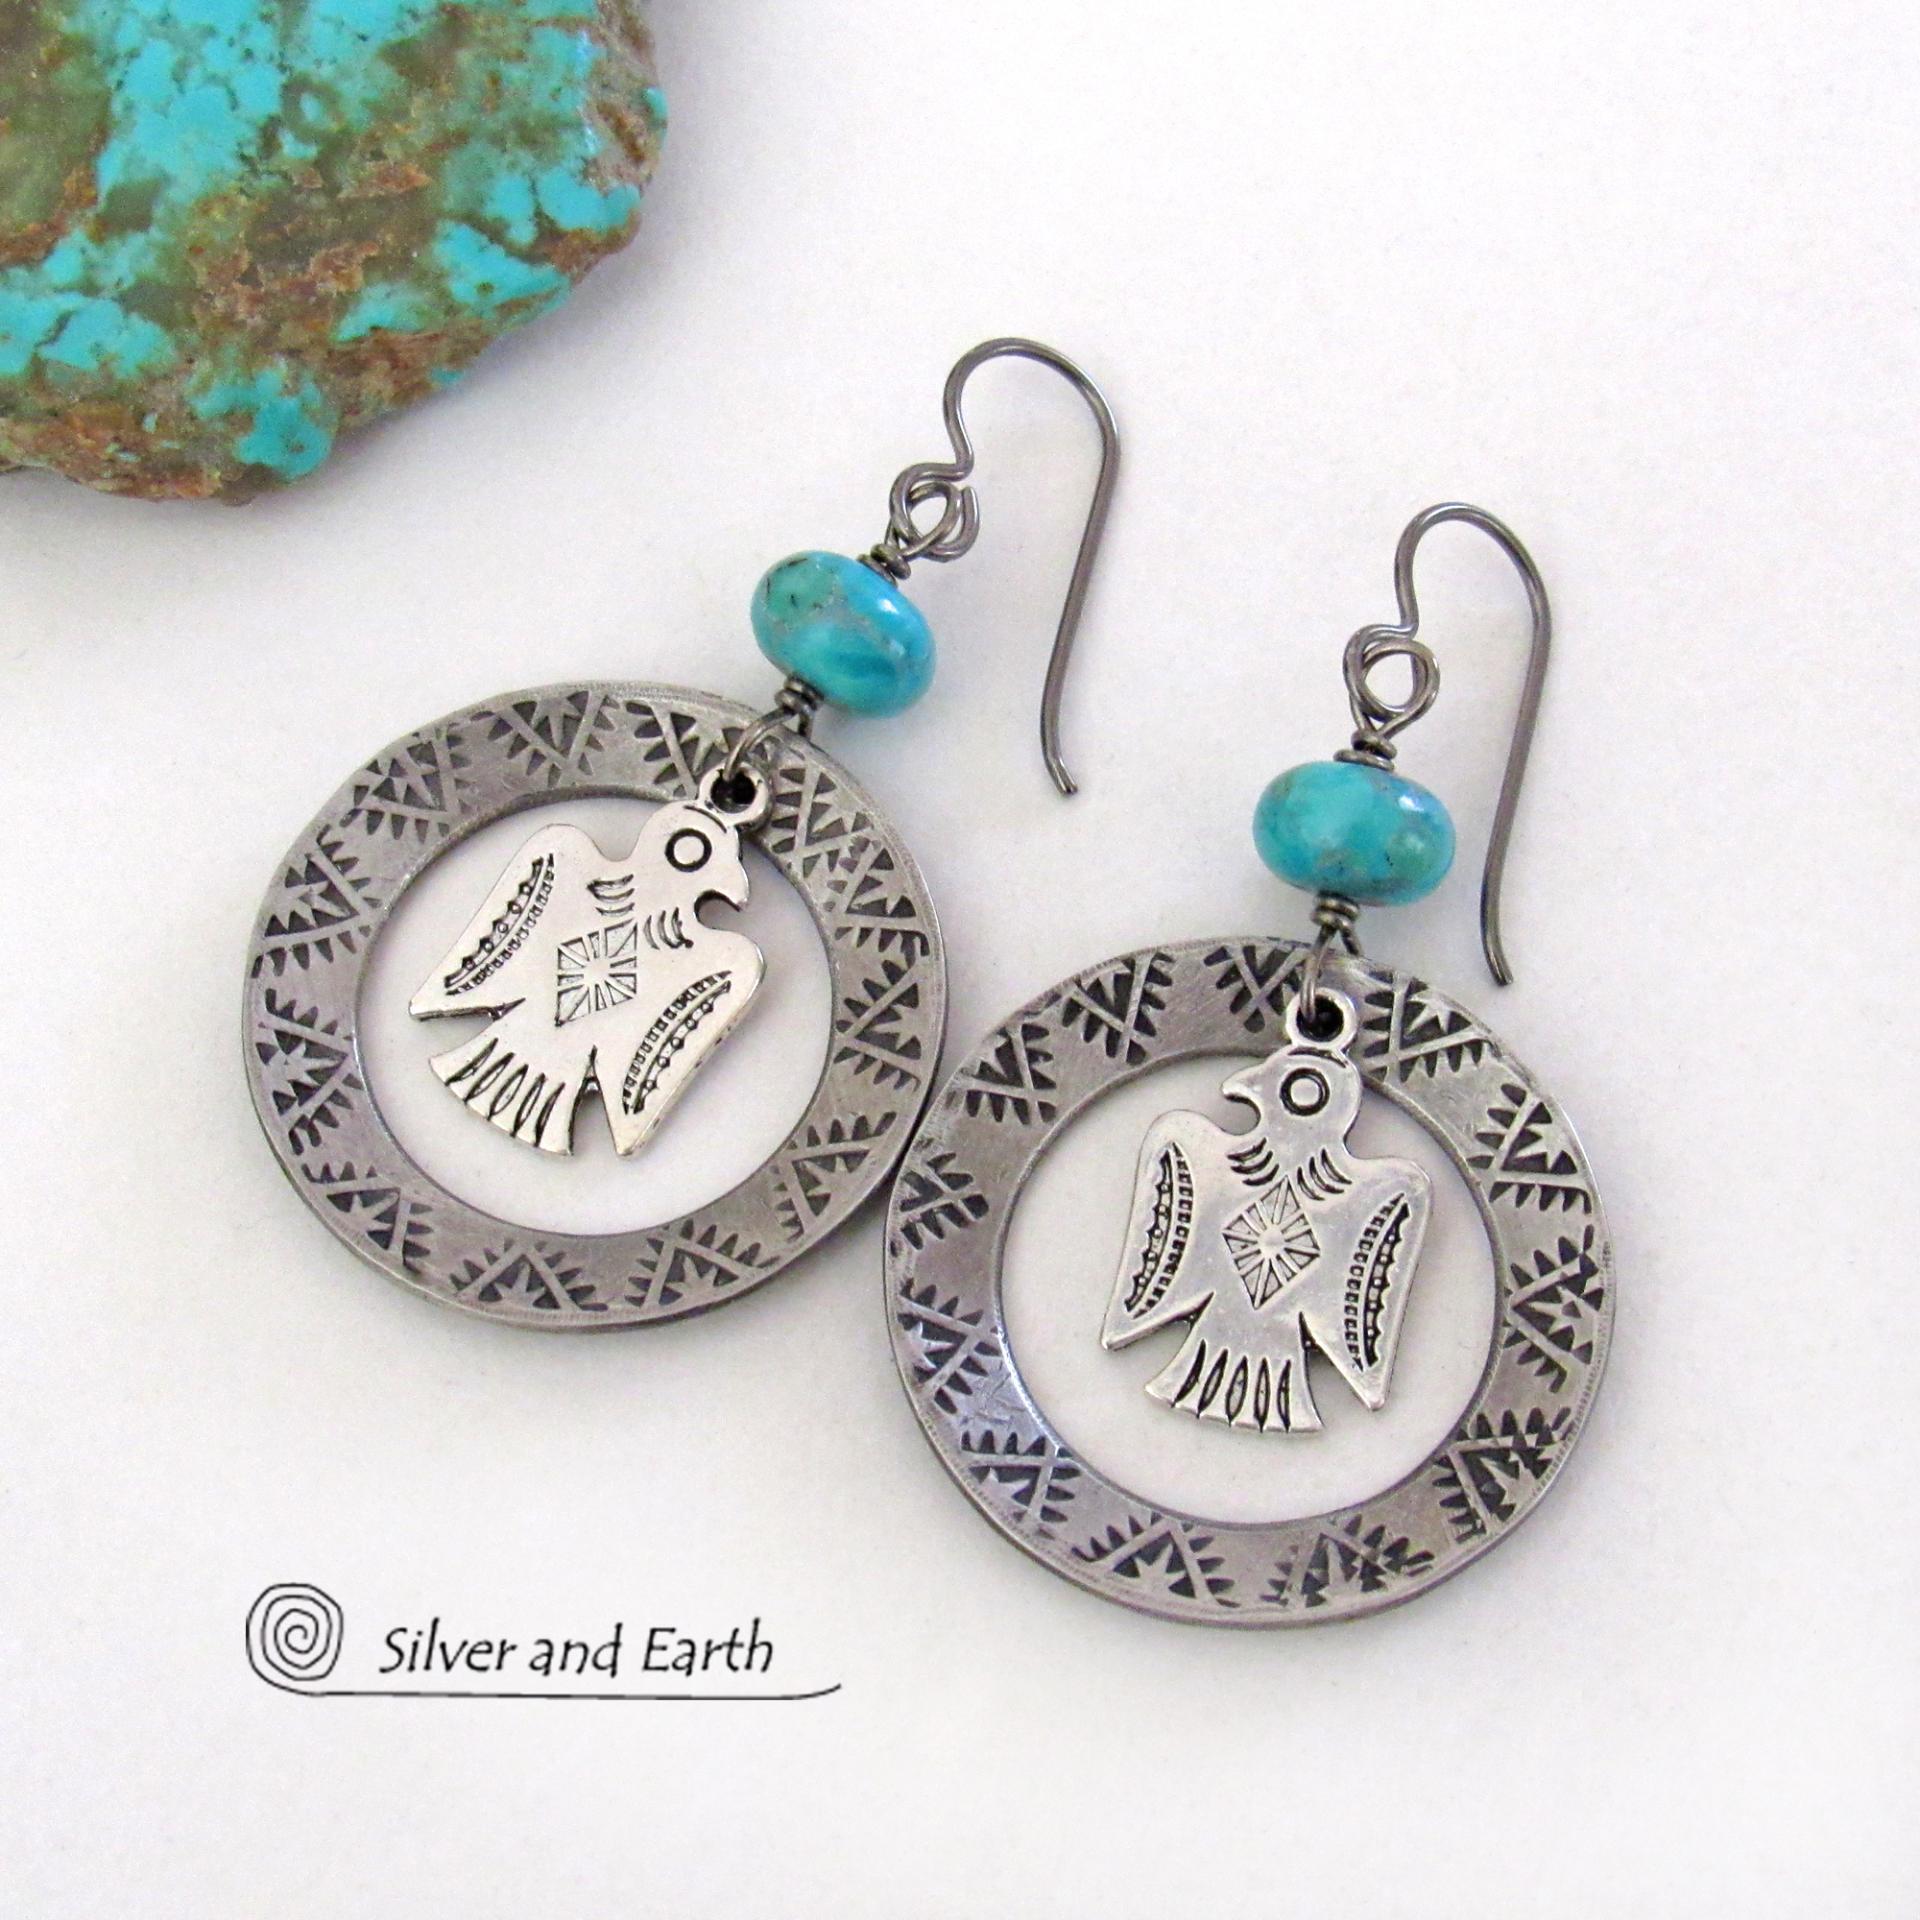 Thunderbird Silver Pewter Hoop Earrings with Blue Turquoise Stones - Handmade Southwestern Style Jewelry